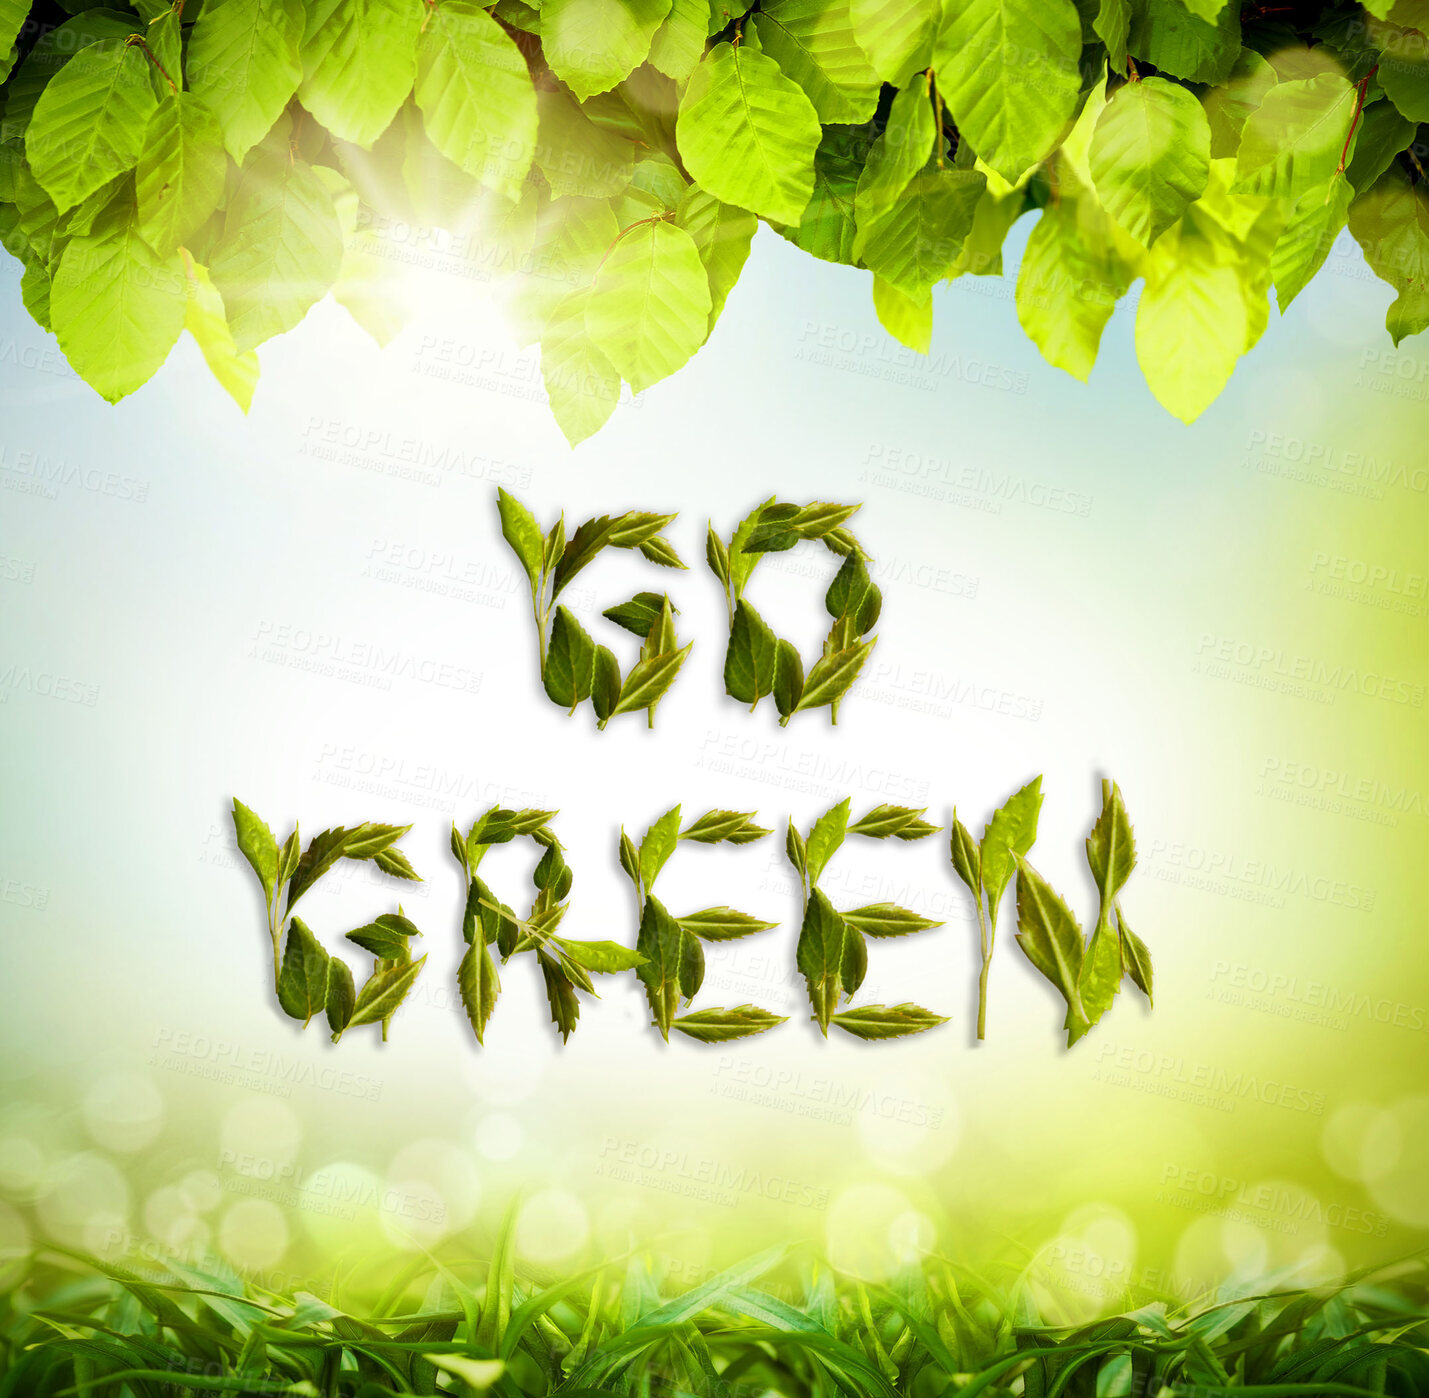 Buy stock photo Lens flare, go green and leaves for sustainability, eco friendly and gradient background. Plants, plants and poster for earth day, environment and awareness for conservation, nature and natural care